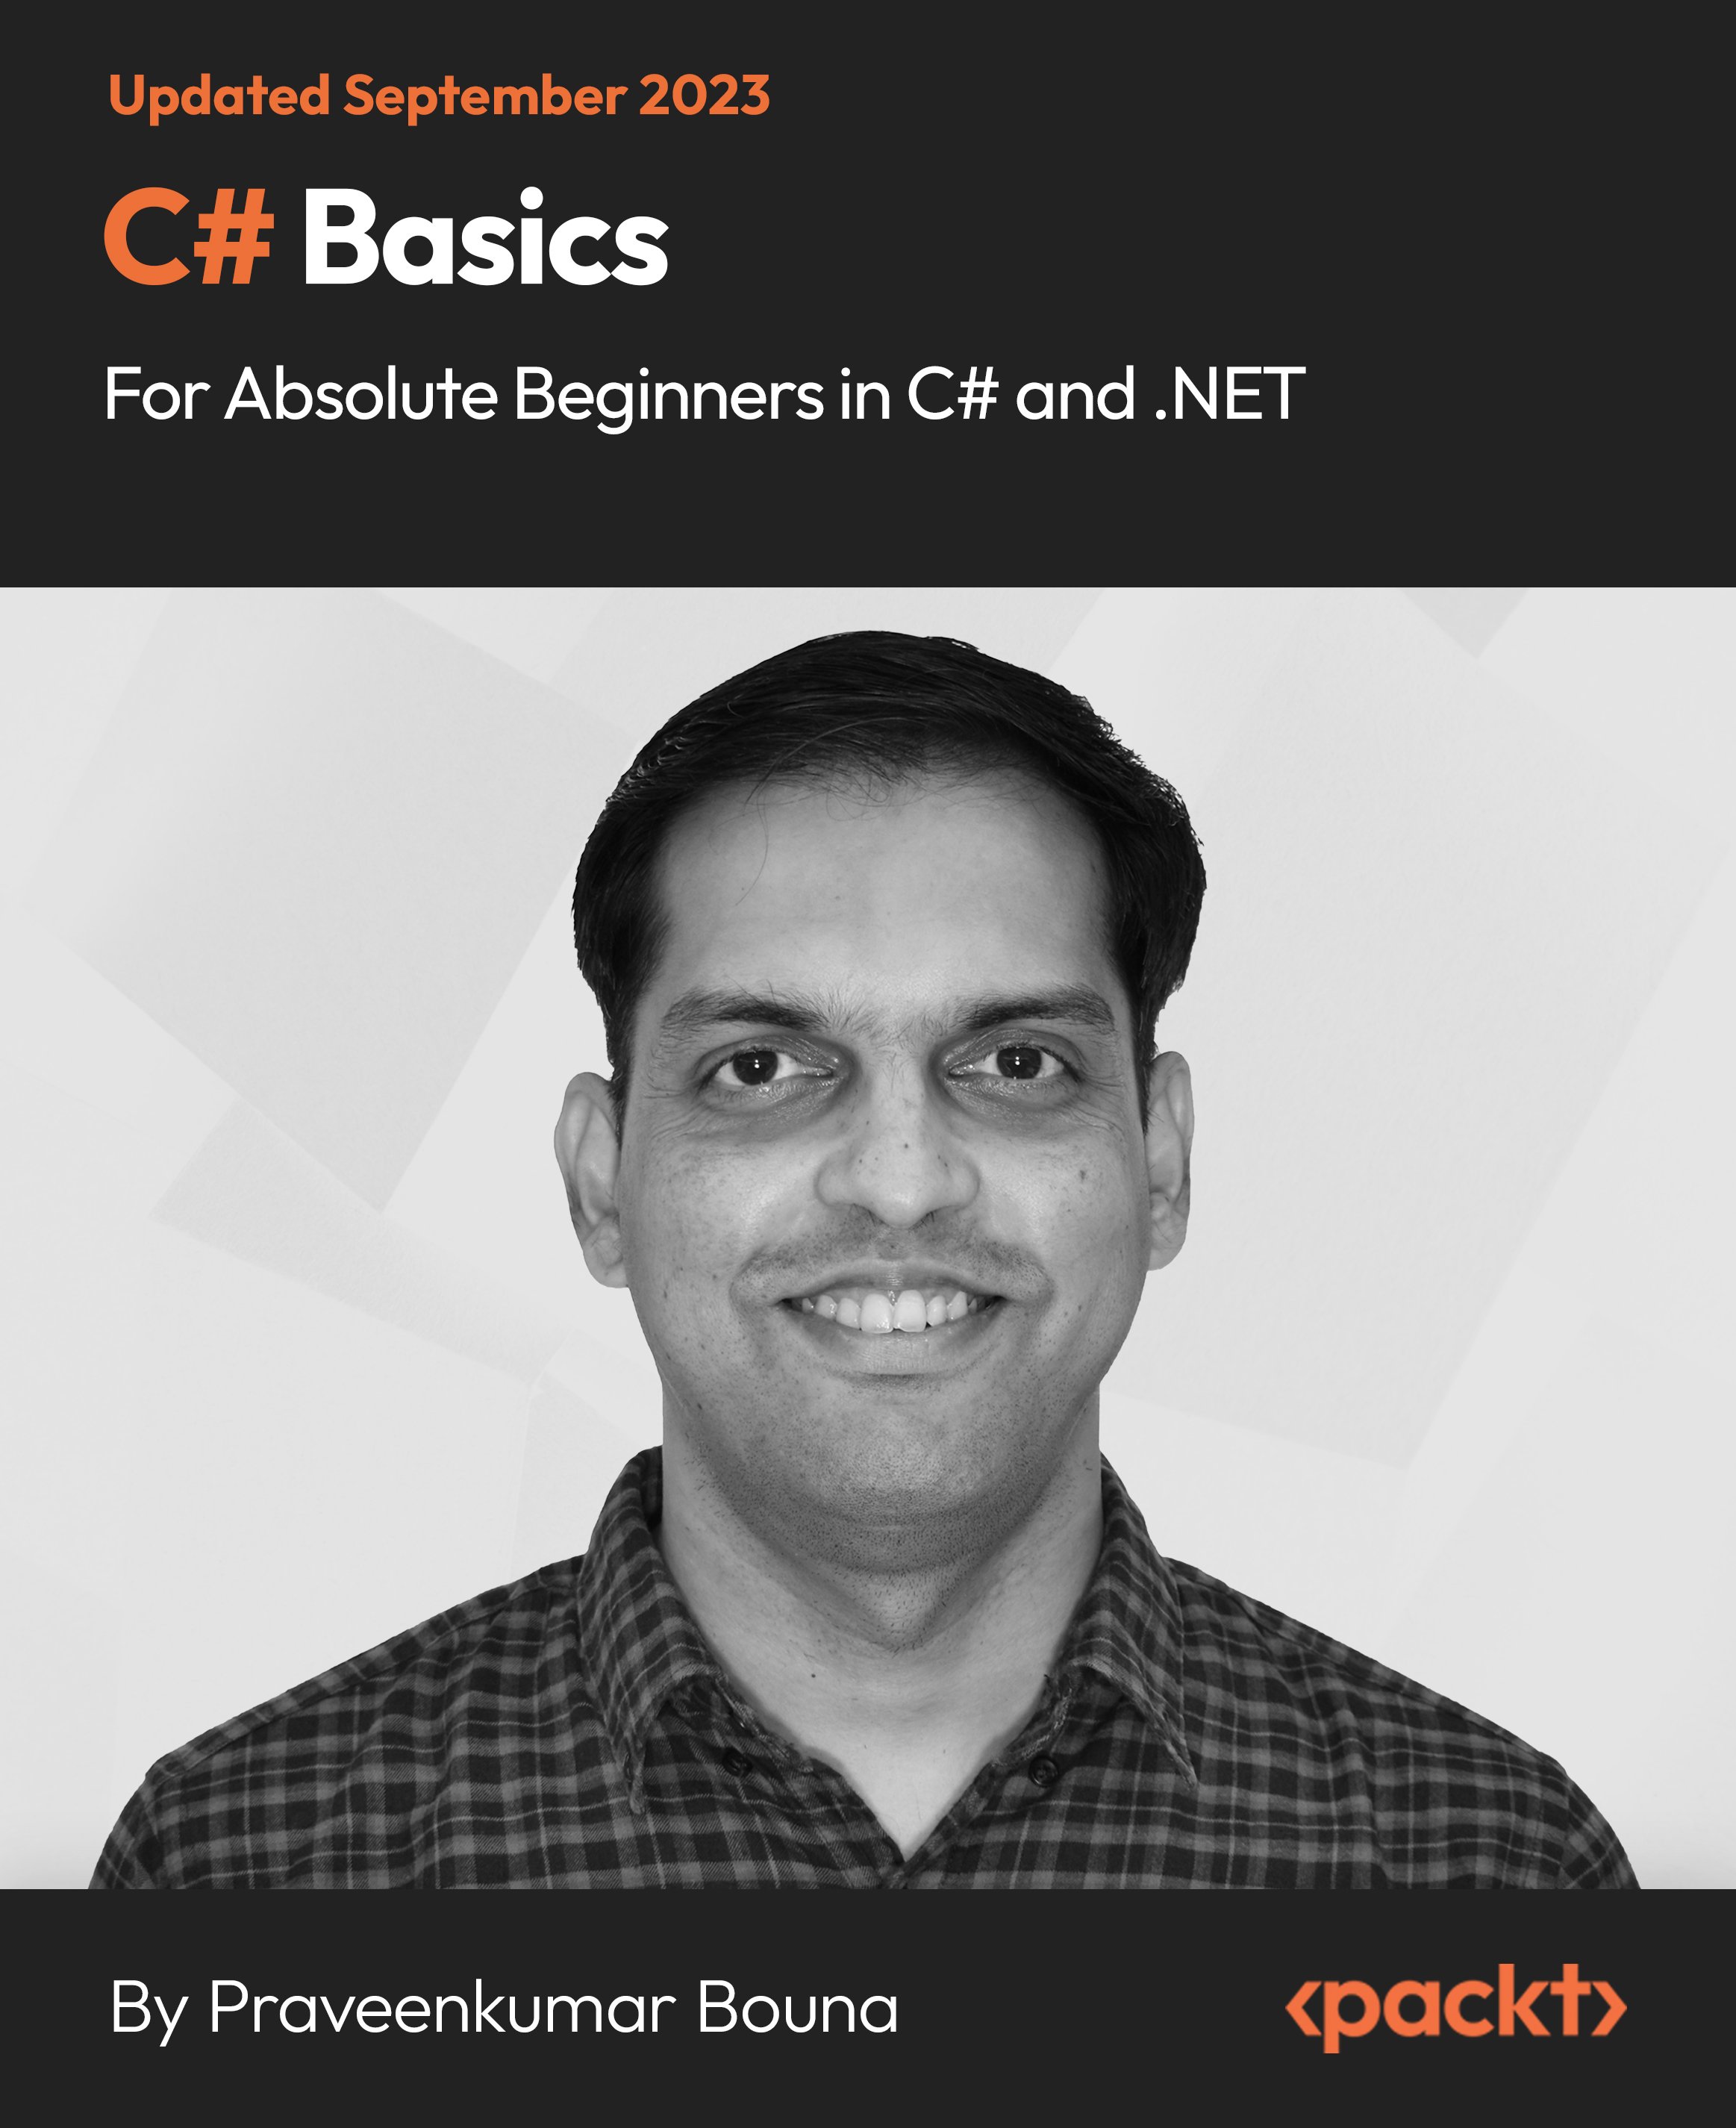 C# Basics For Absolute Beginners in C# and .NET